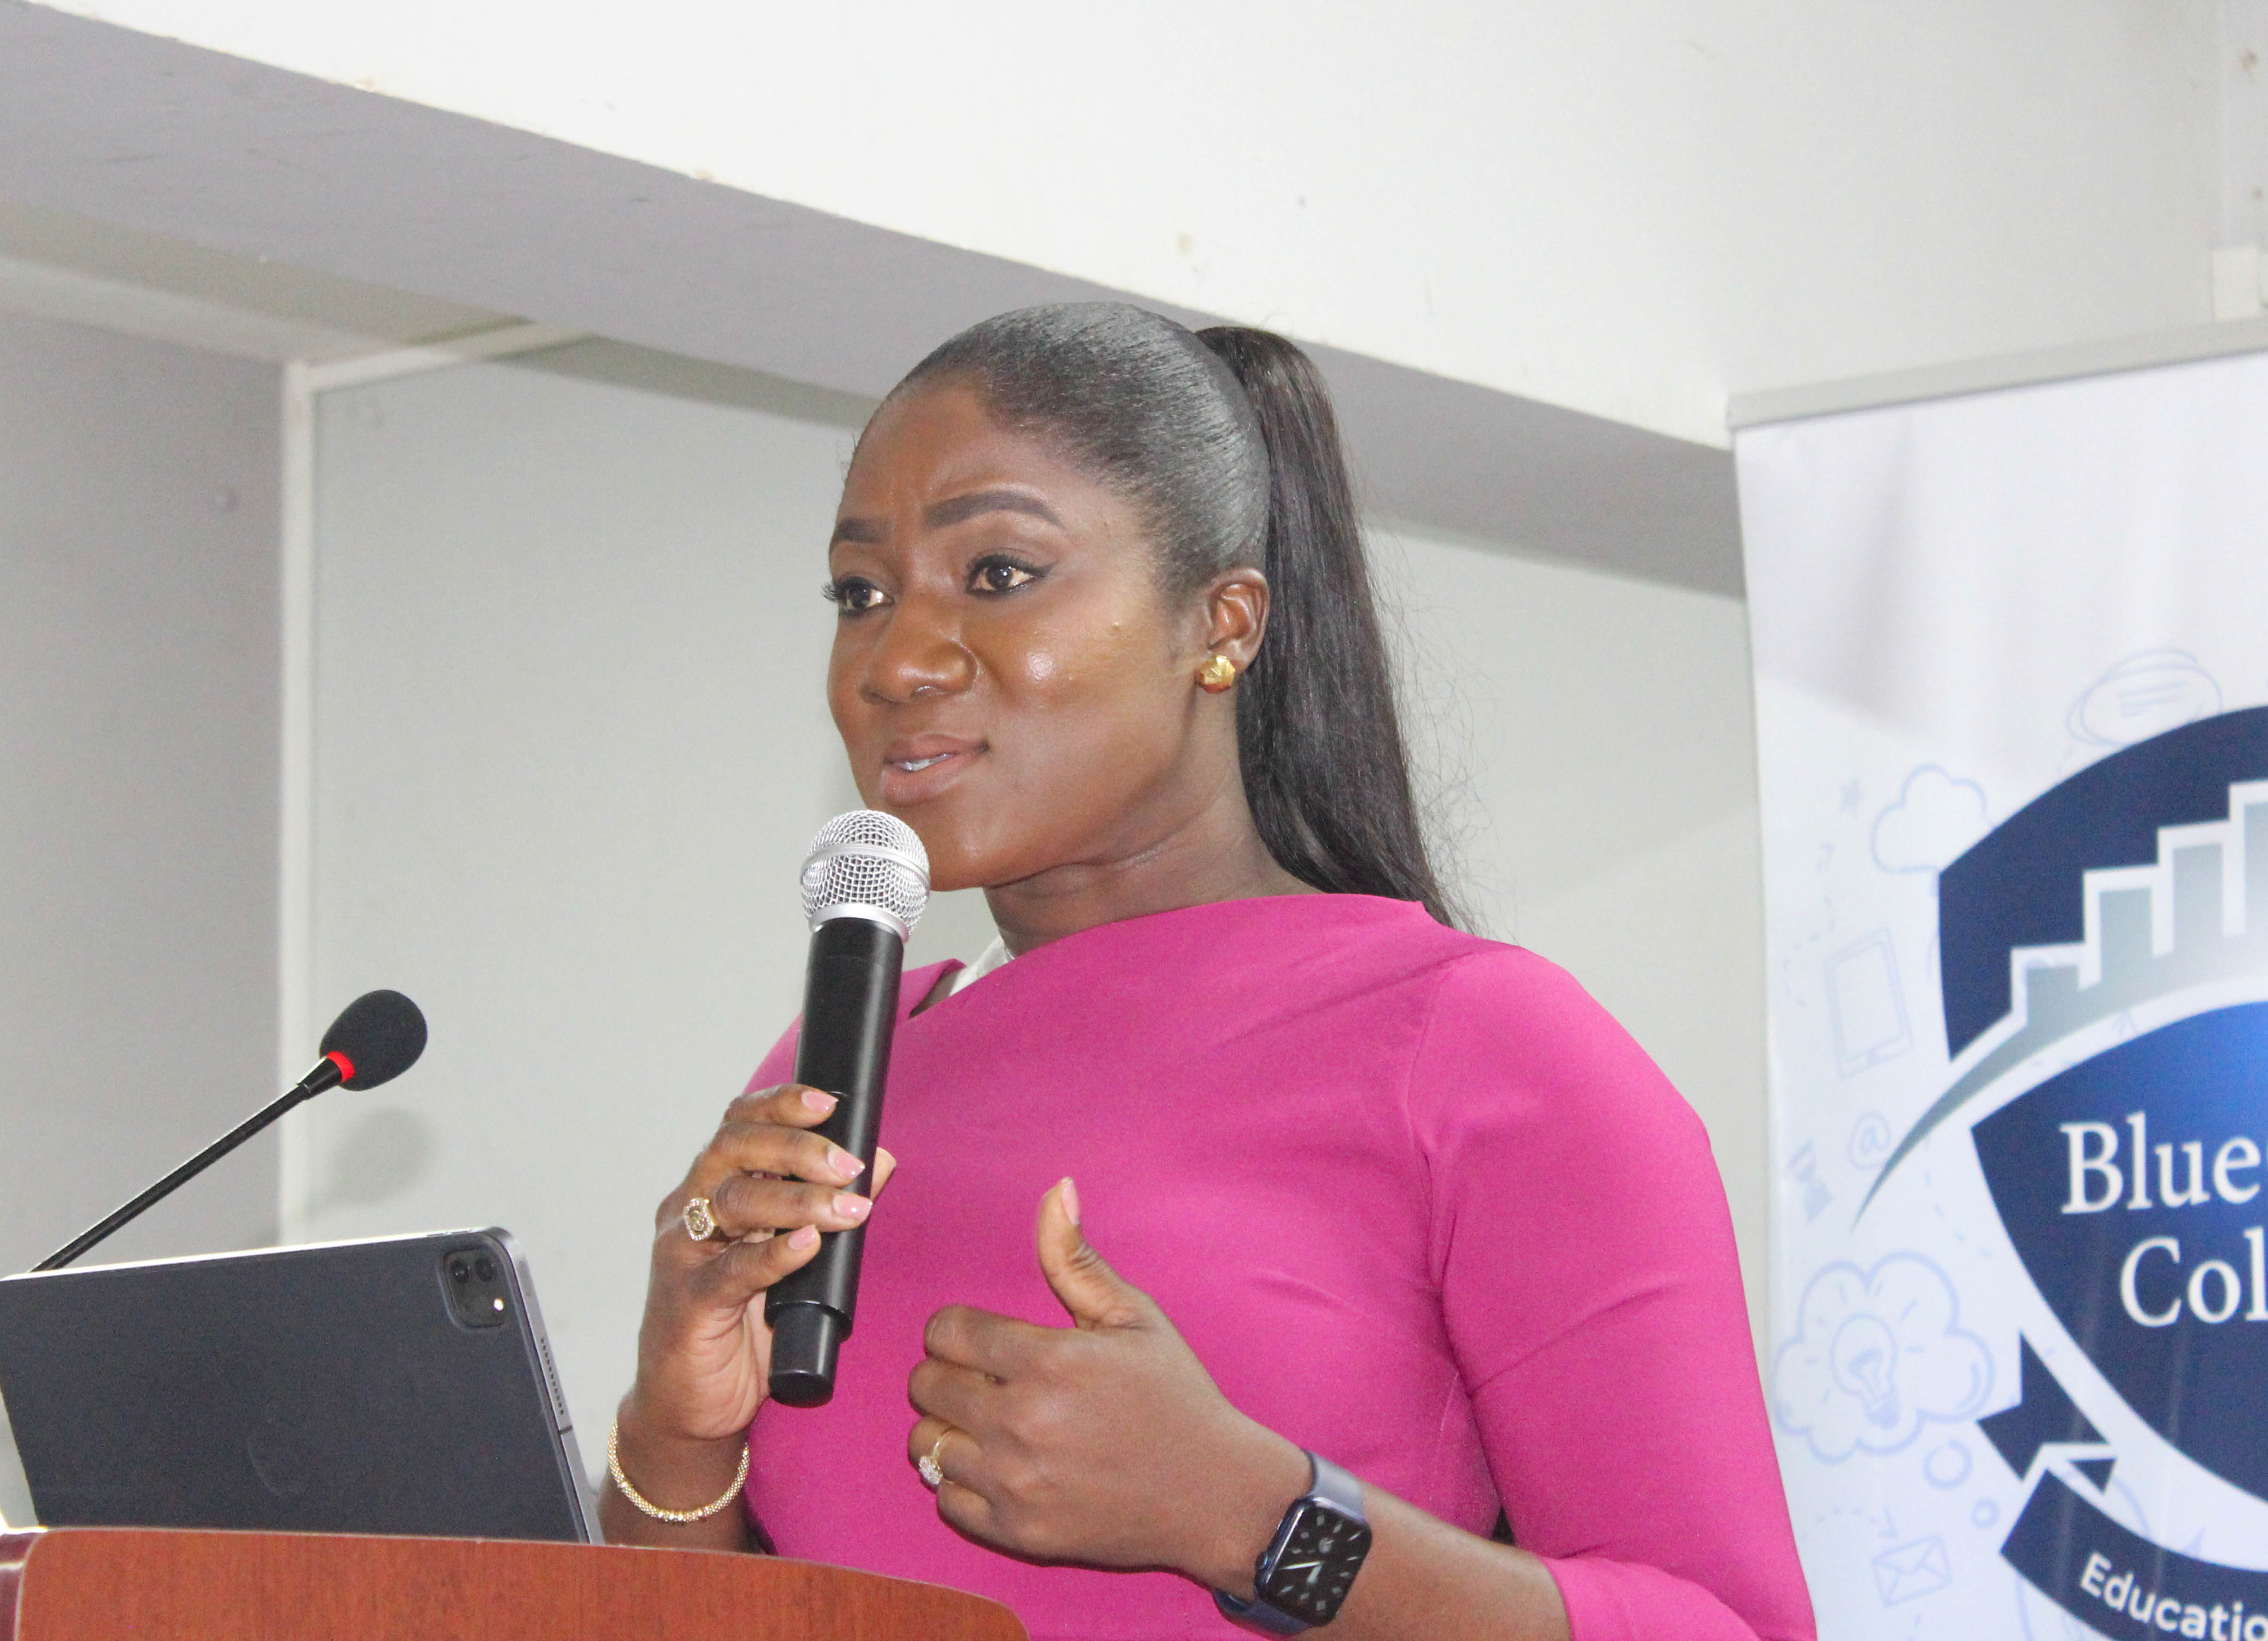 Take advantage of opportunities, equip yourselves with skills - Deputy NYA CEO urges youth